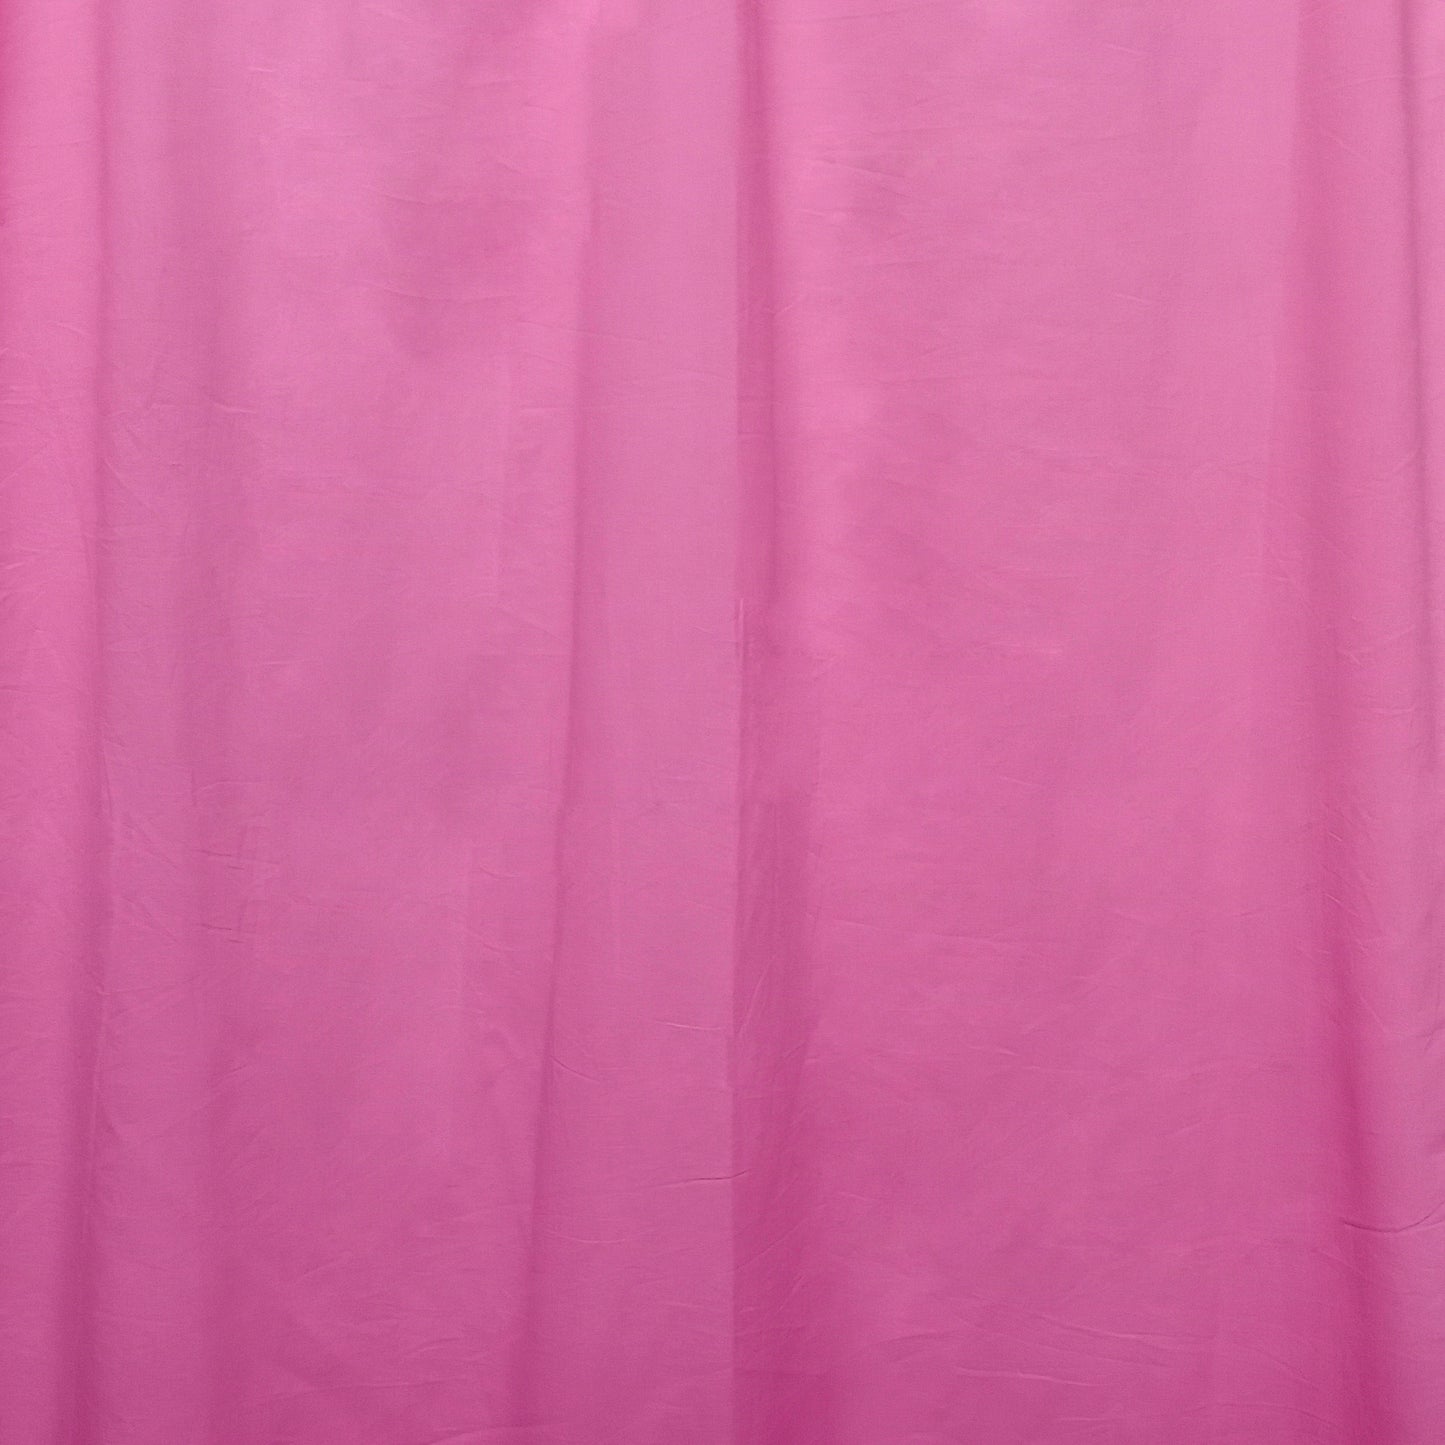 Cotton Cambric Pink width 44 inches Fabric per meter